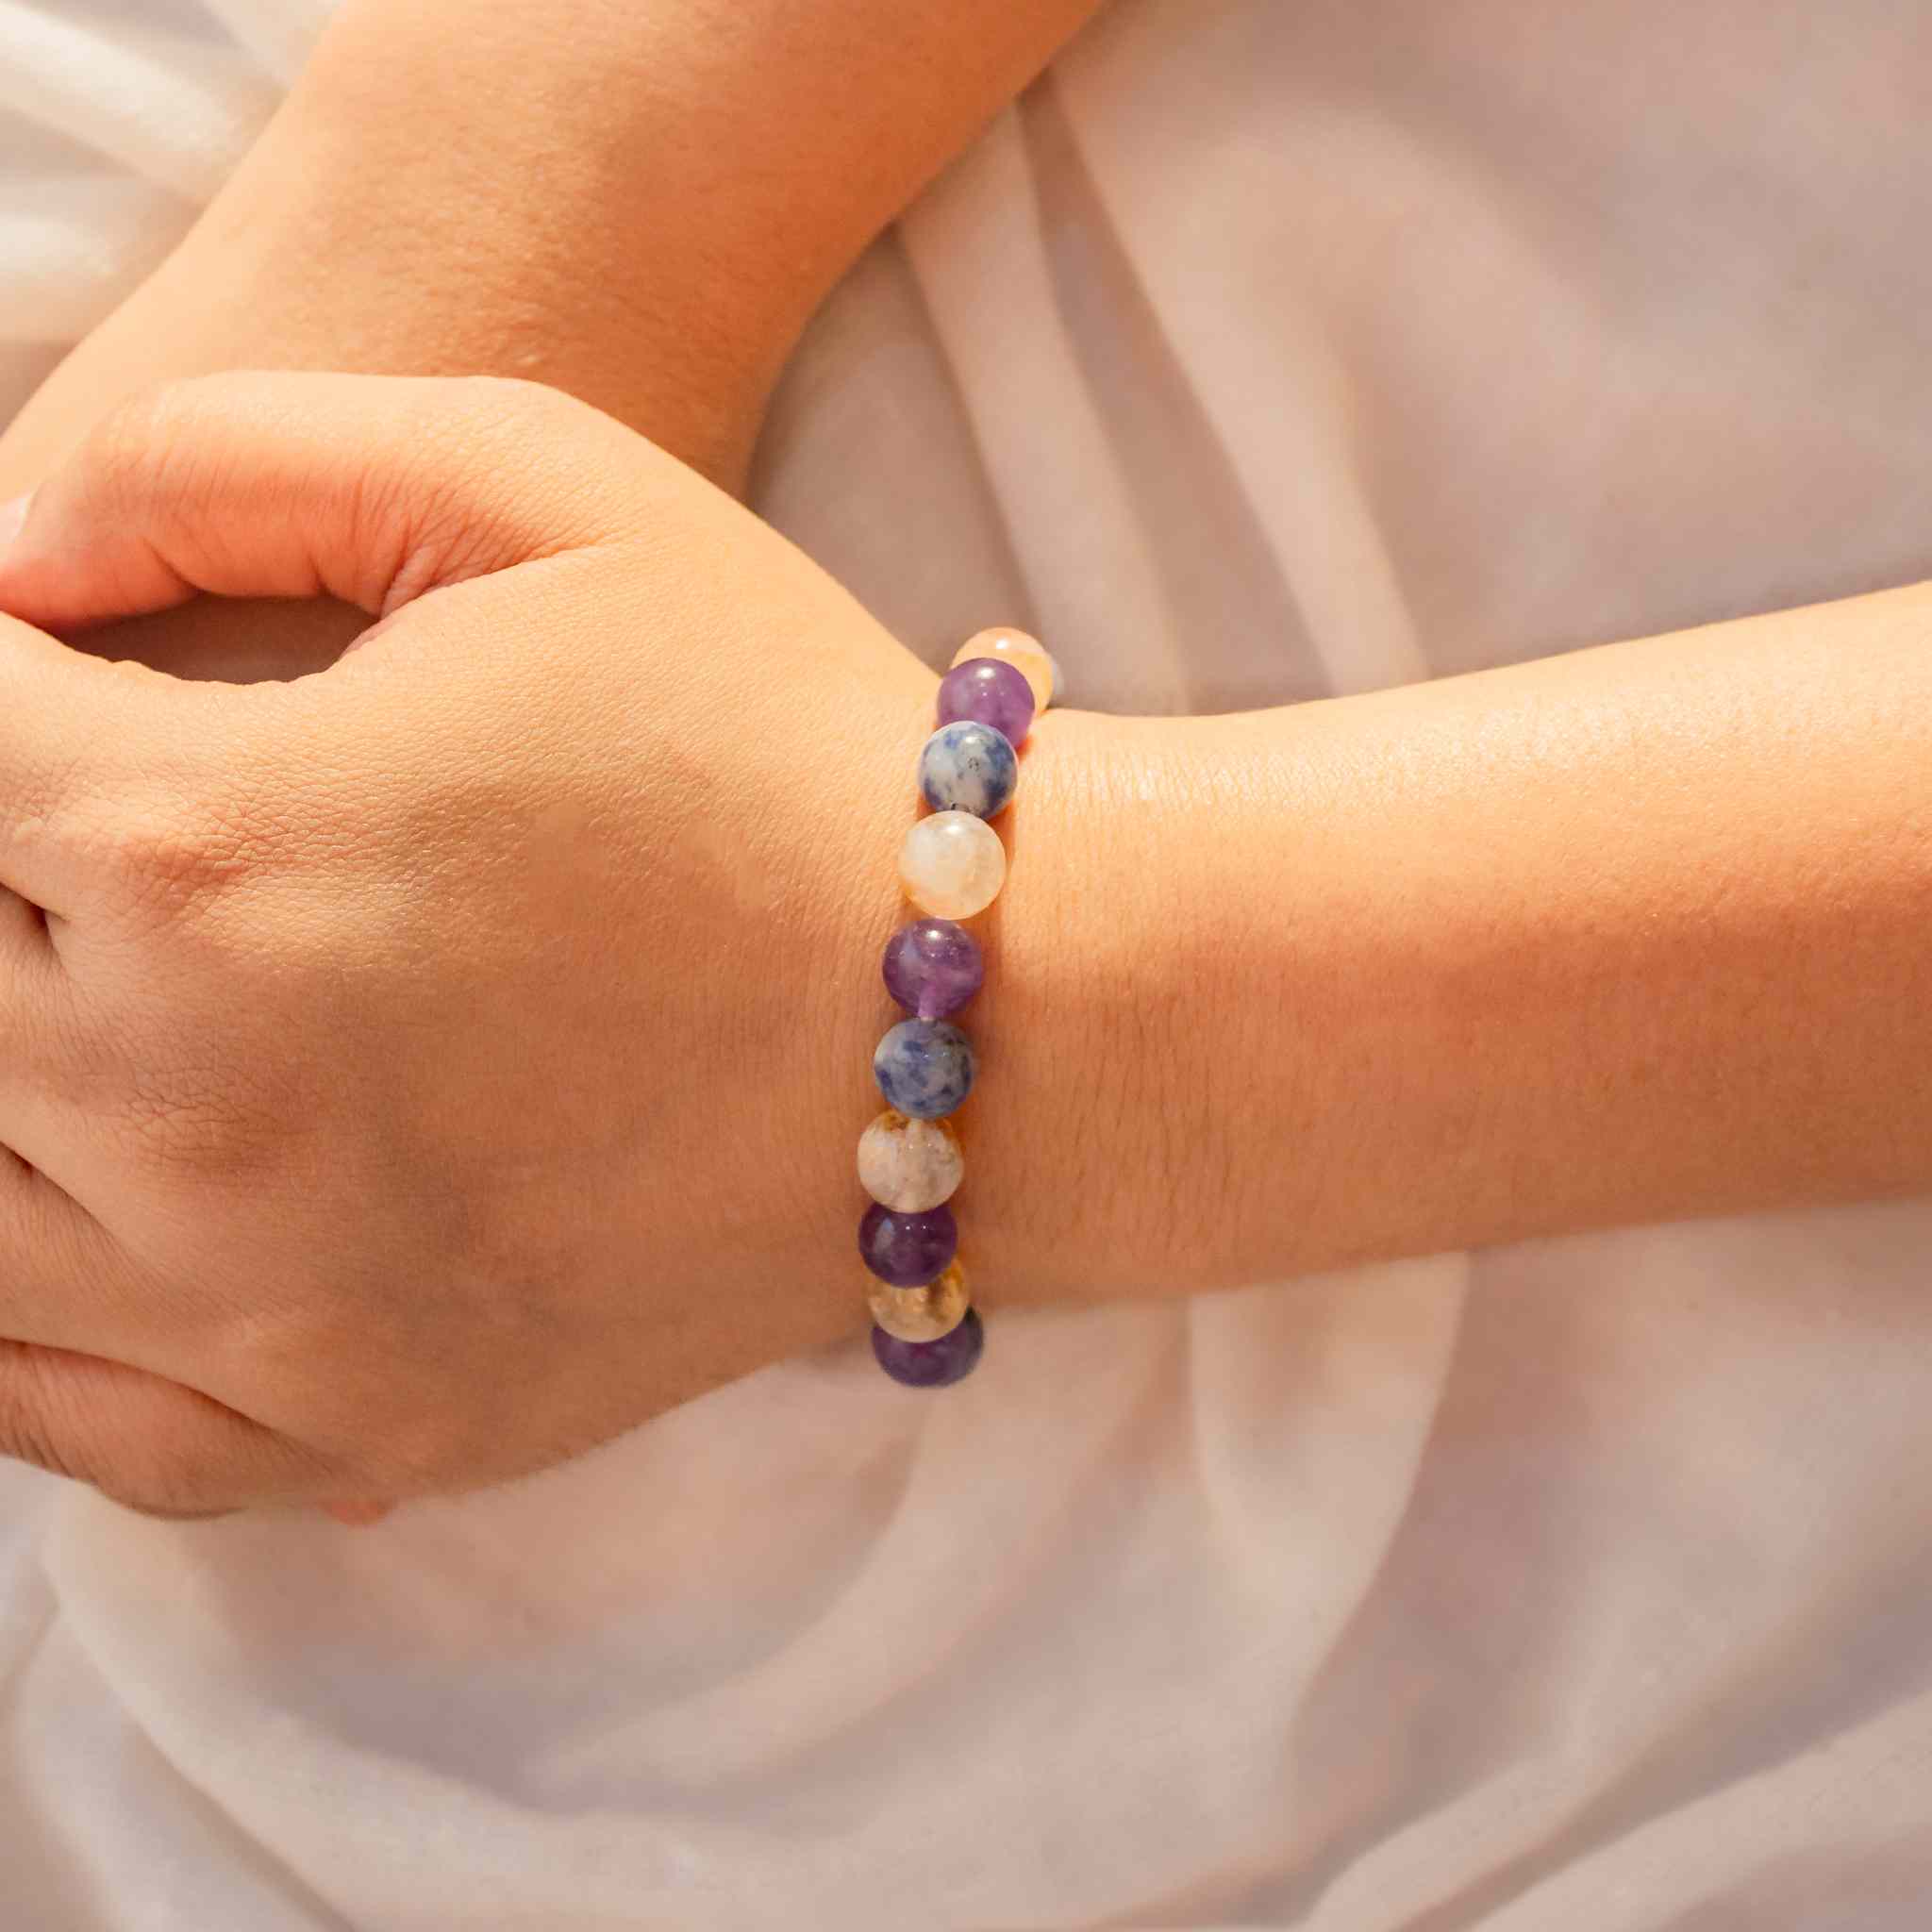 This bracelet lets you know who is stressing you out the most